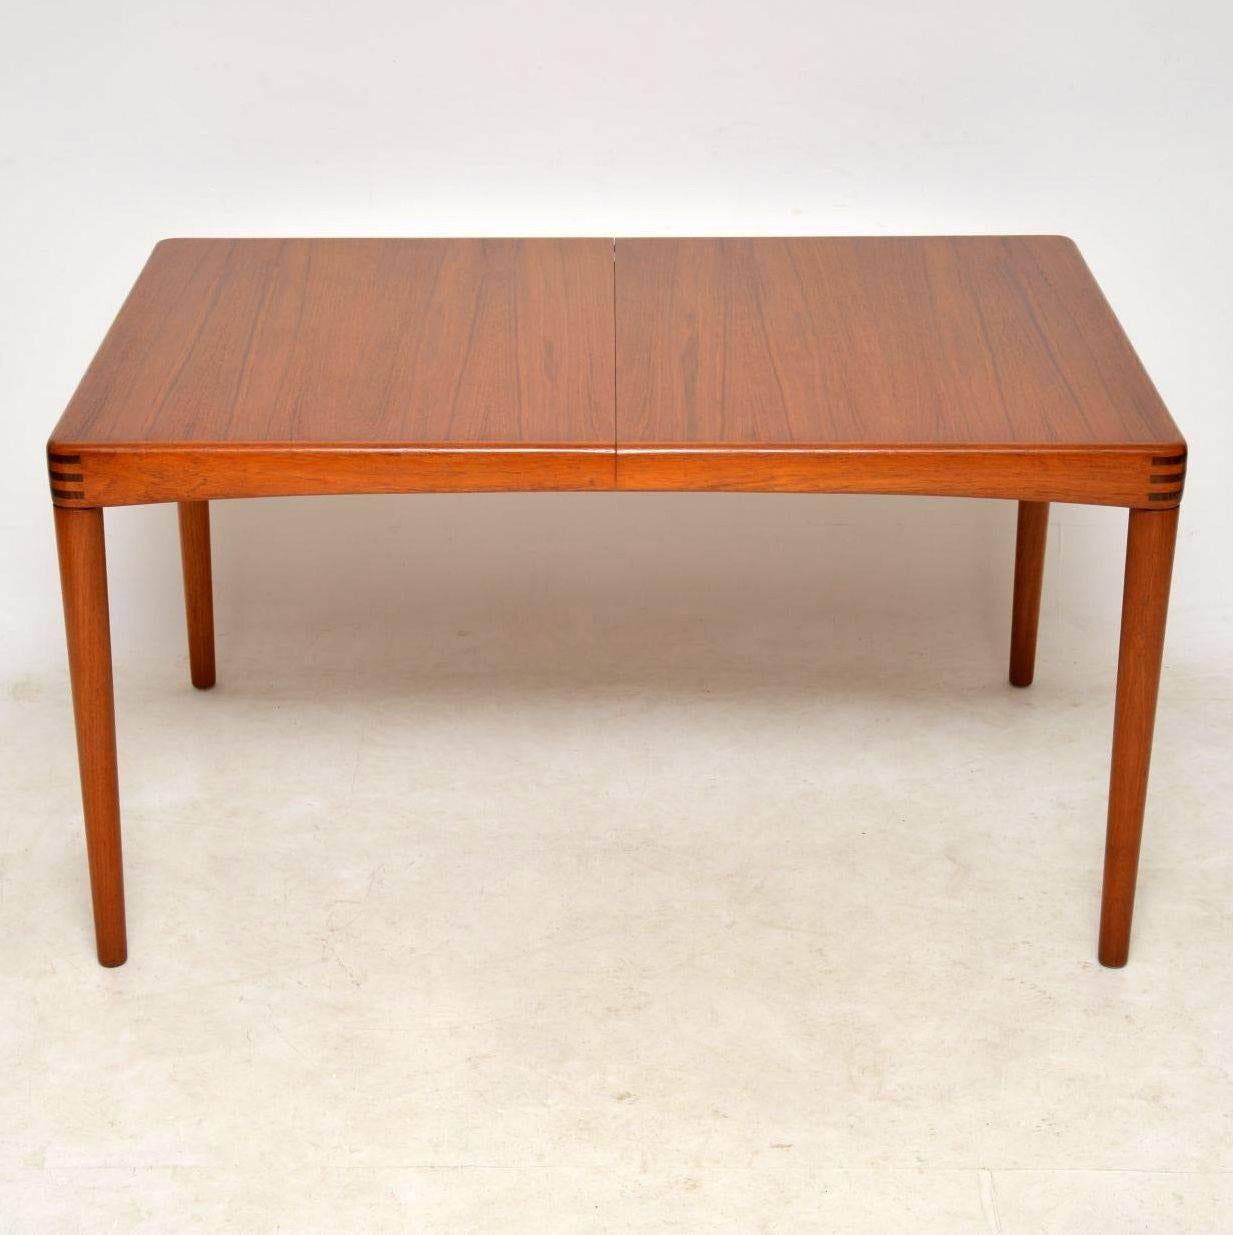 A superb Danish vintage dining table, this was designed by Henry Klein for Bramin, it dates from the 1960s. It is predominantly teak, with beautiful dark wood biscuit joints on the corners. We have had this stripped and re-polished to a very high